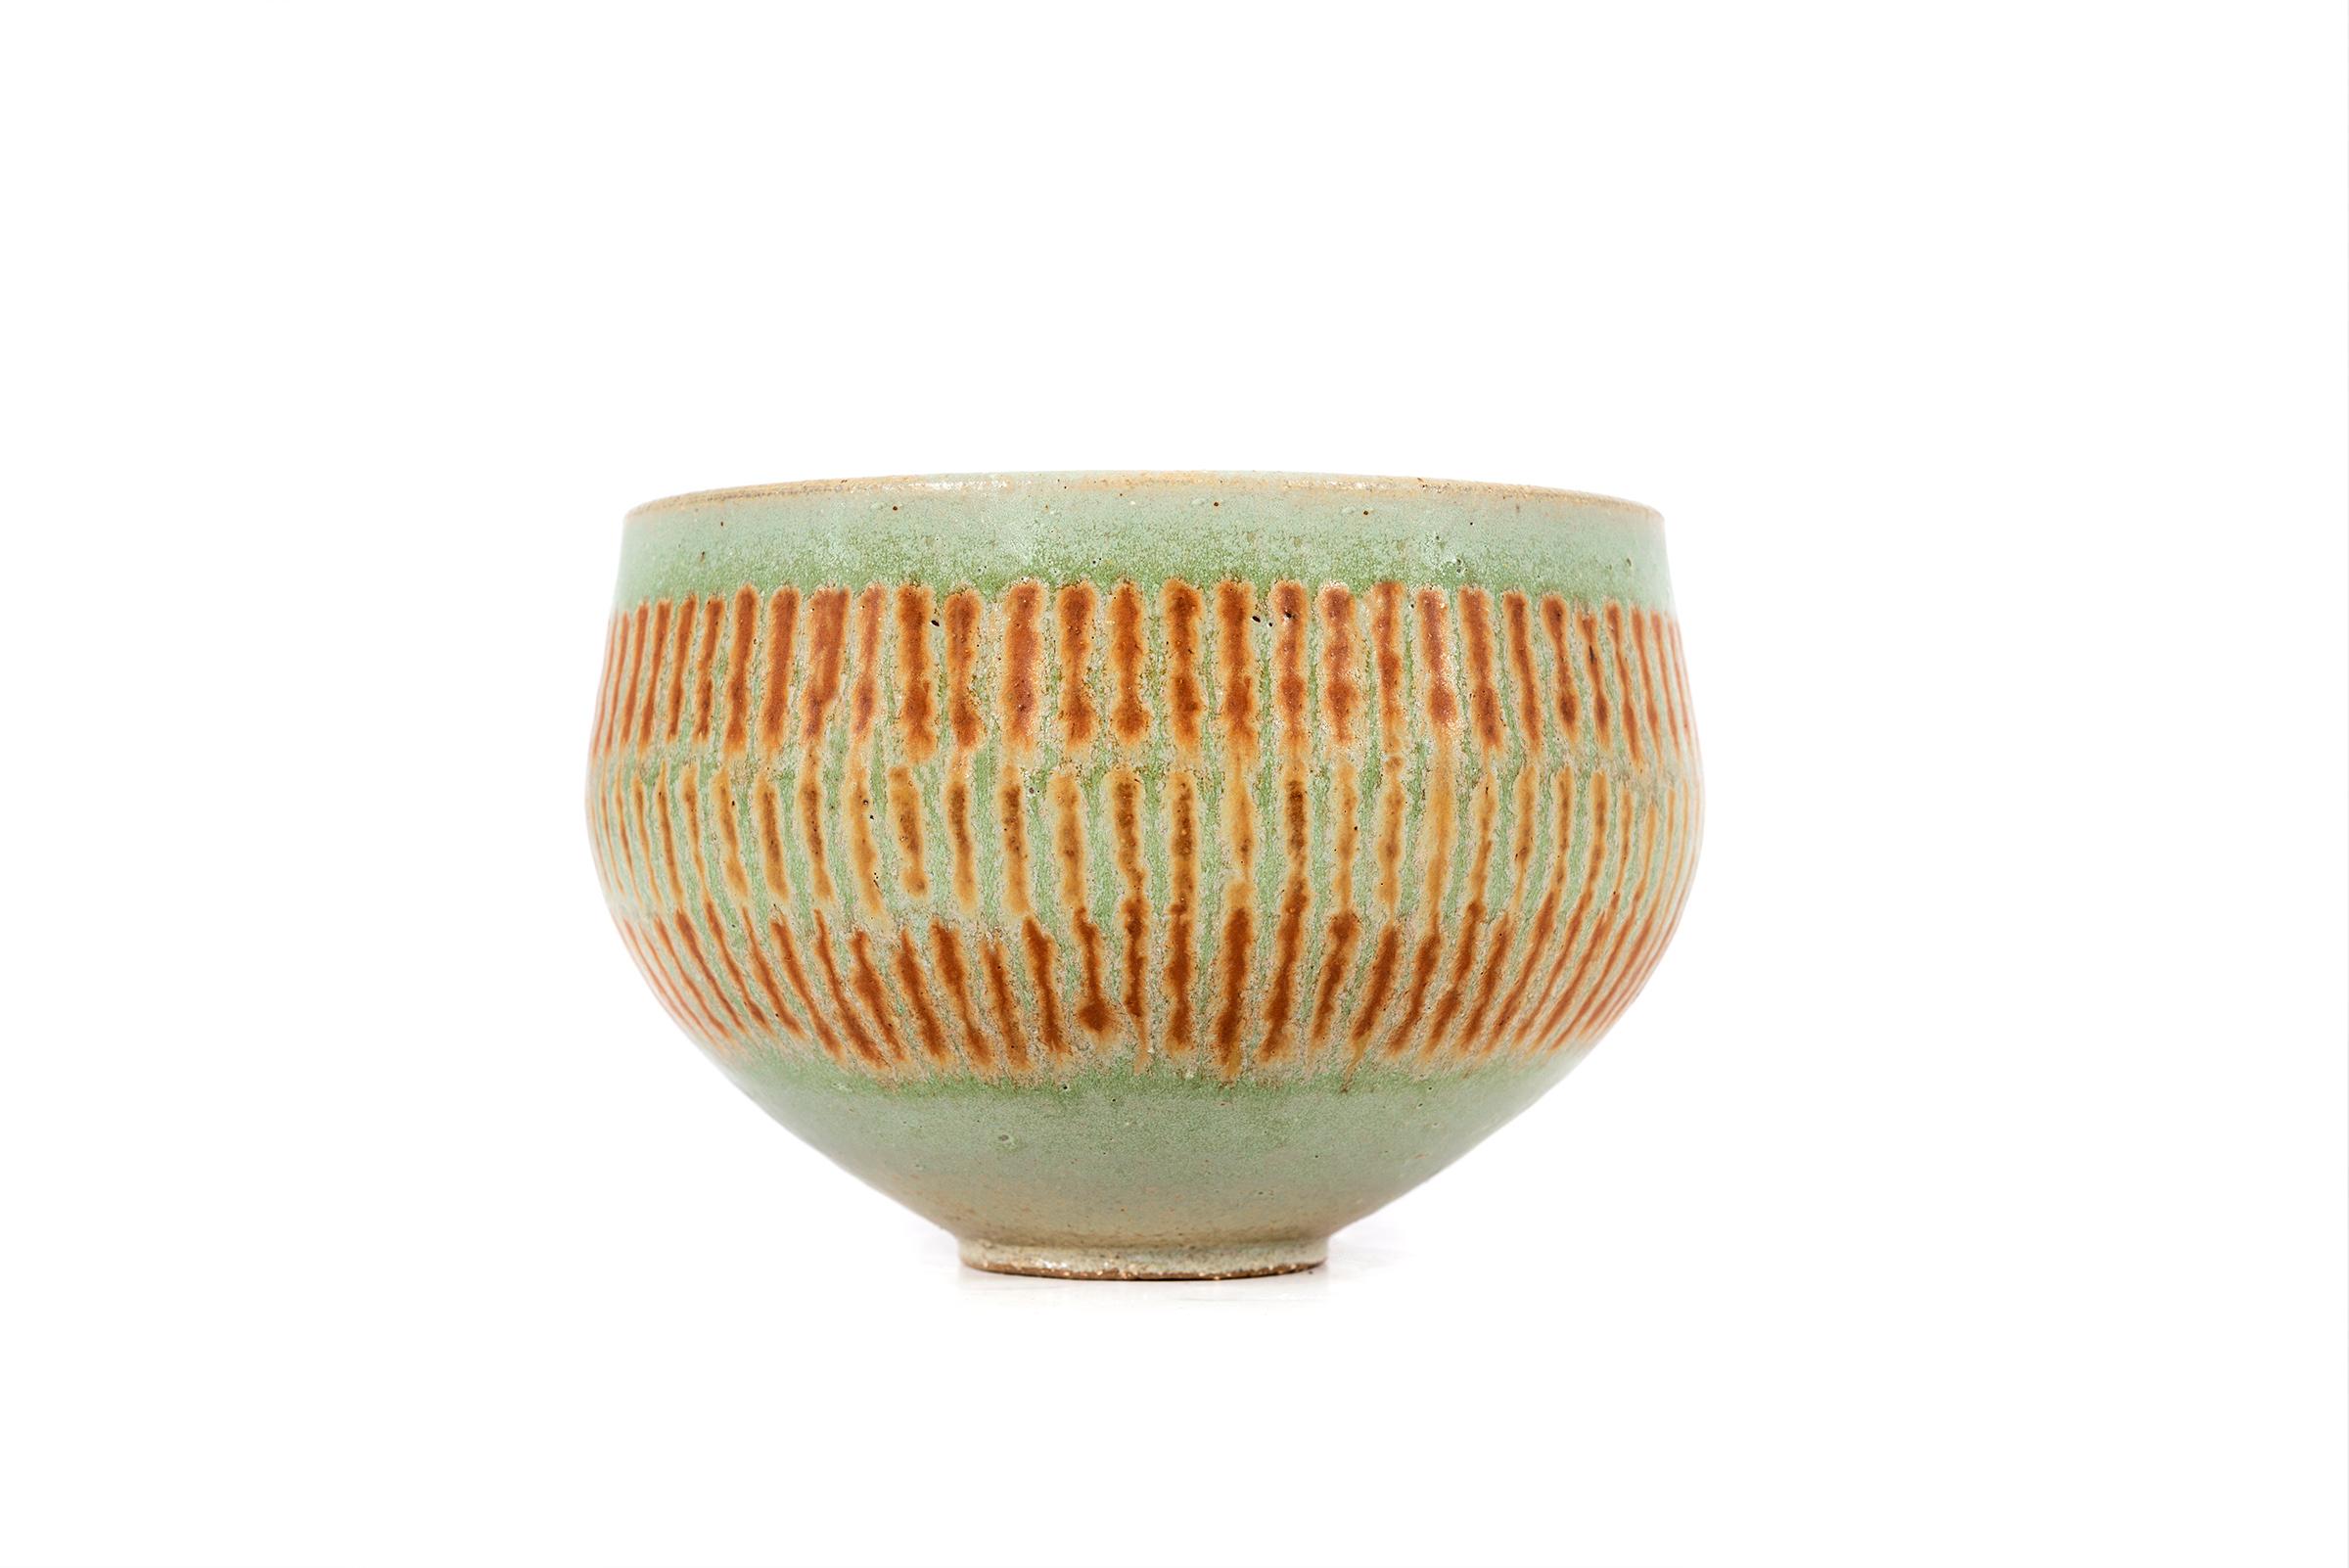 Clyde Burt tea bowl in celadon glazed stoneware with applied abstract details.
Signed to underside: [CB].
American, circa 1965.